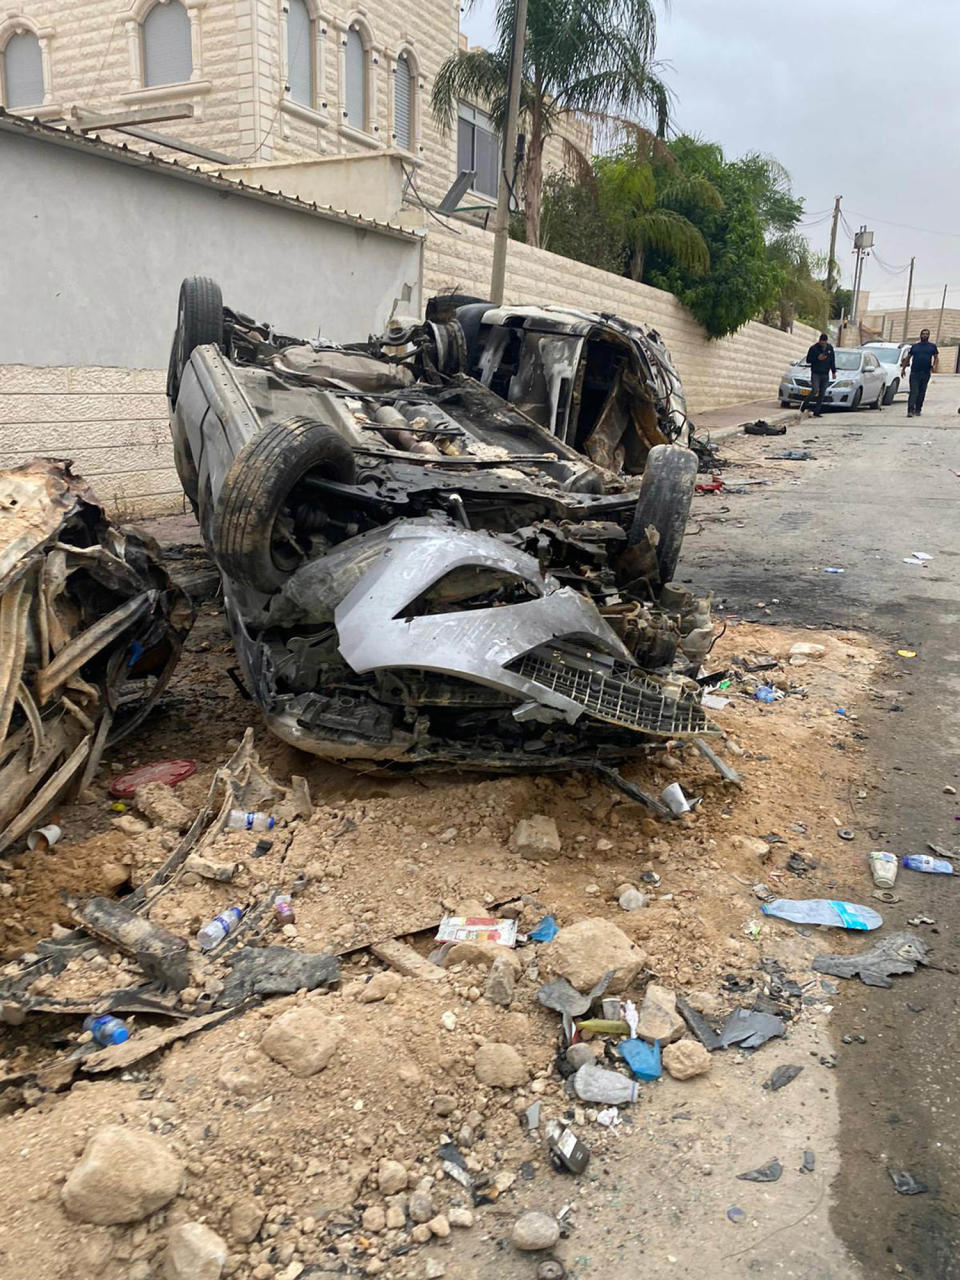 A destroyed car sits in the street from rocket damage in the Bedouin town of Arara. (Courtesy Jawad Abu Asa)